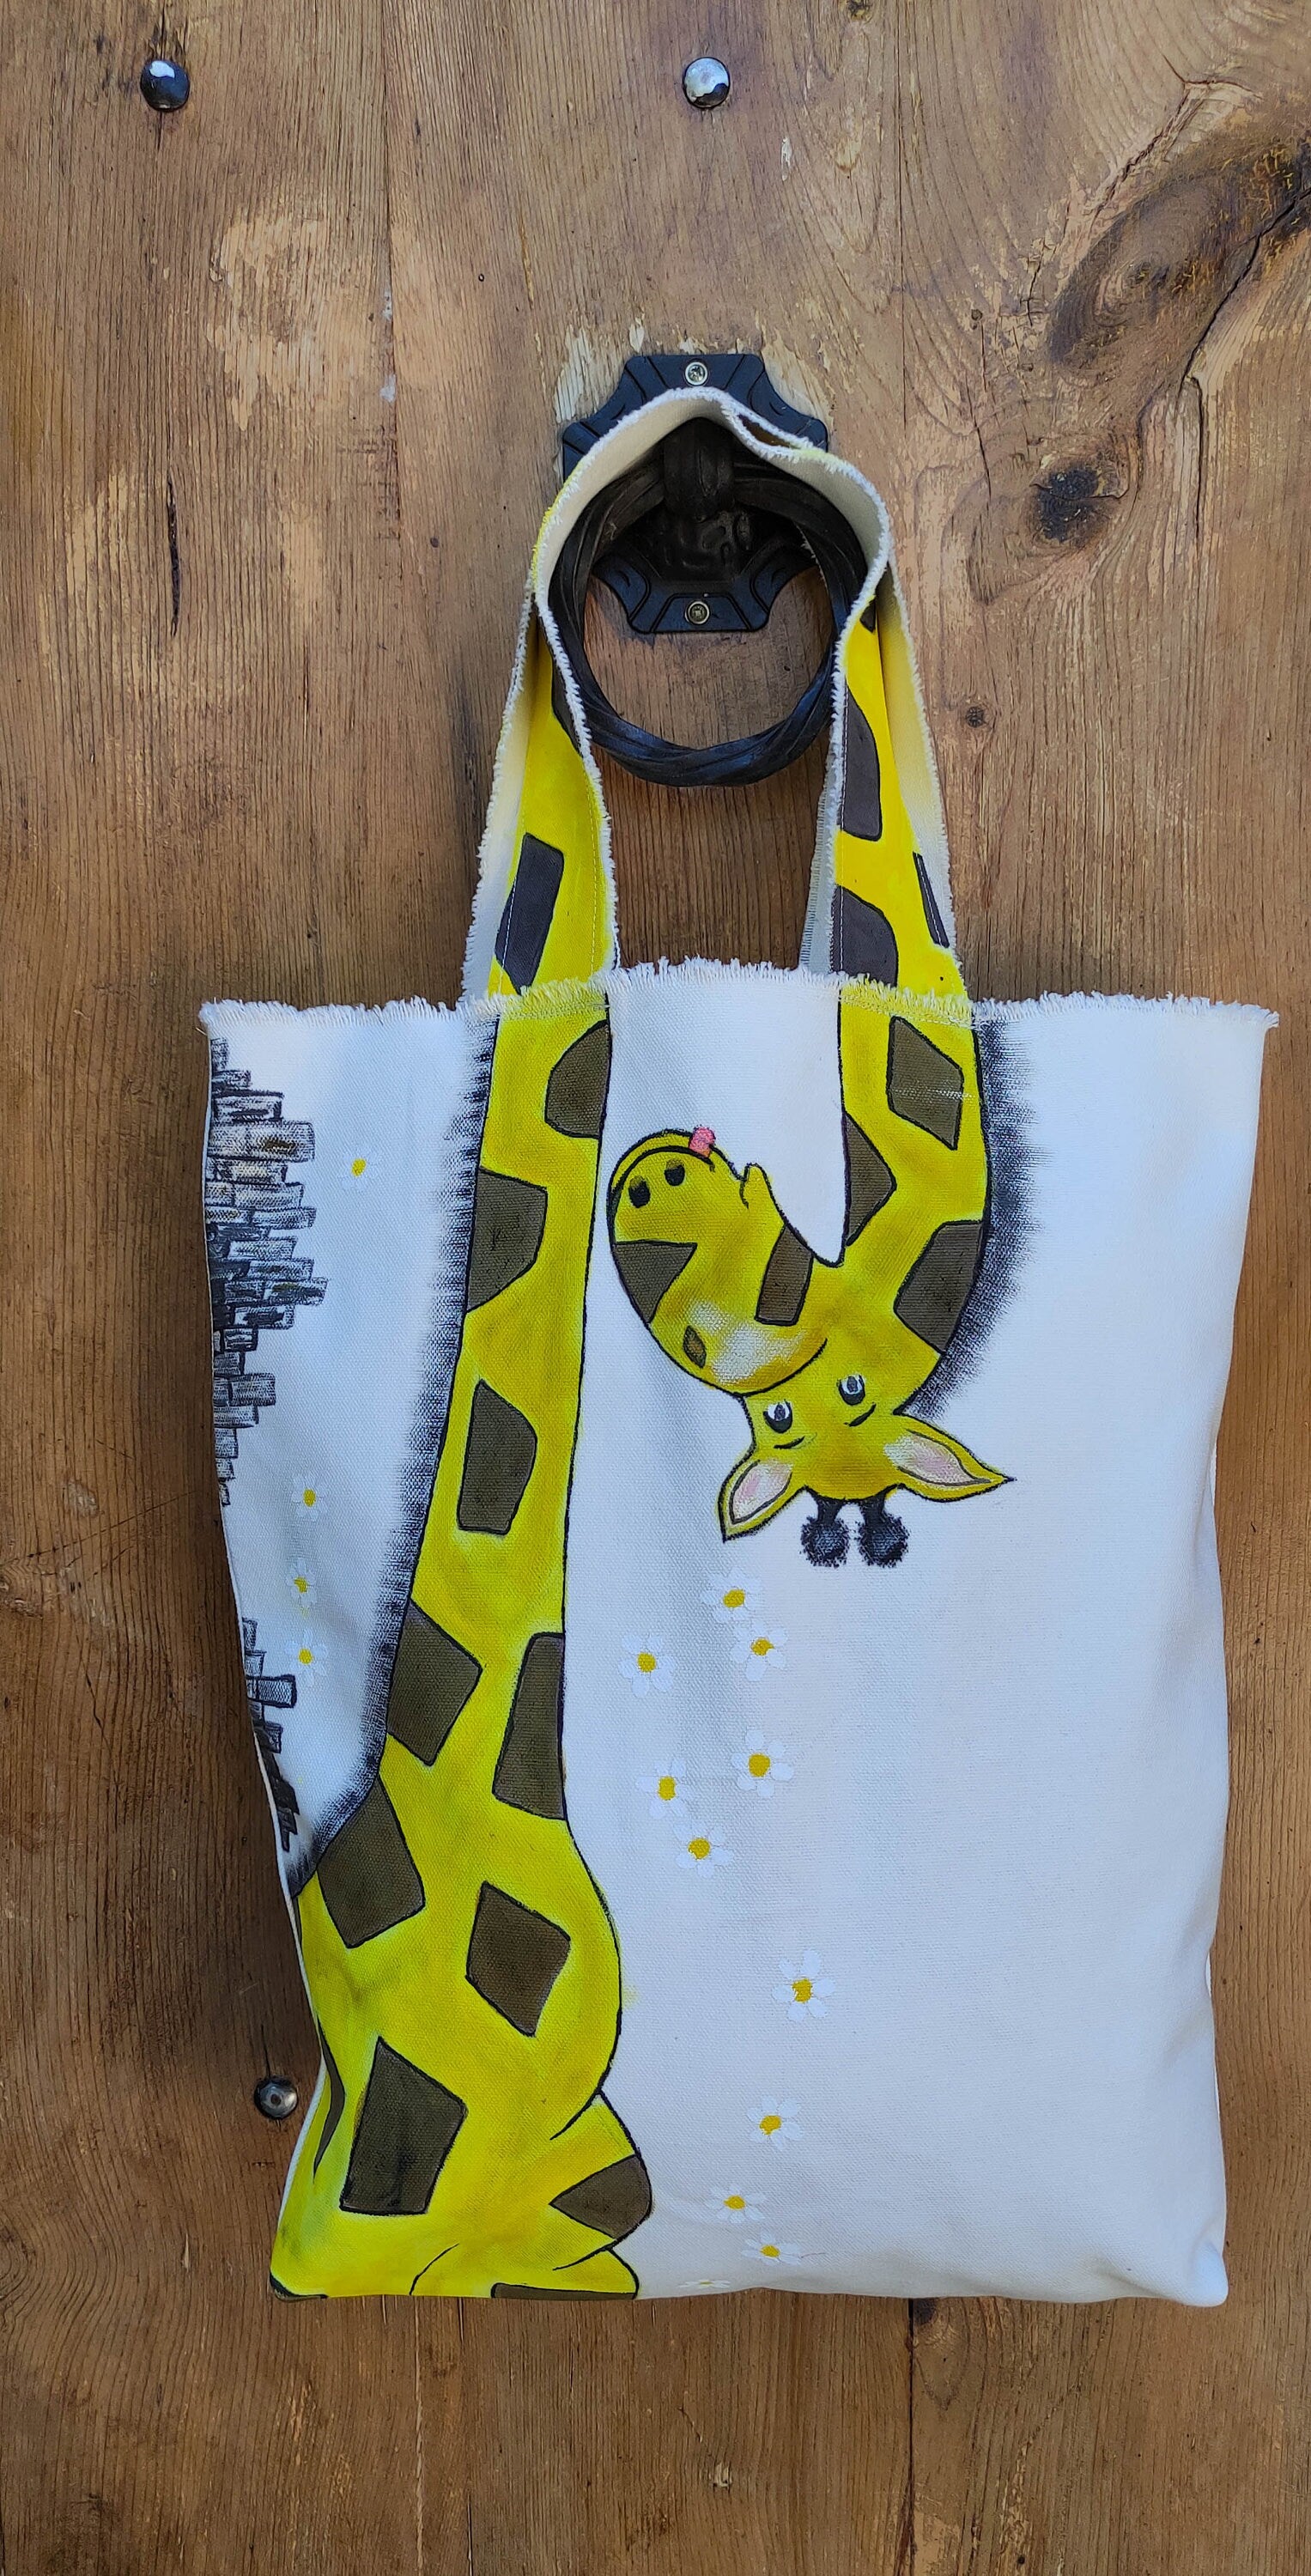 Our 100% cotton and natural hand painted tote bags finished off with the leather straps are tote-ally one of a kind which are perfect for all use!